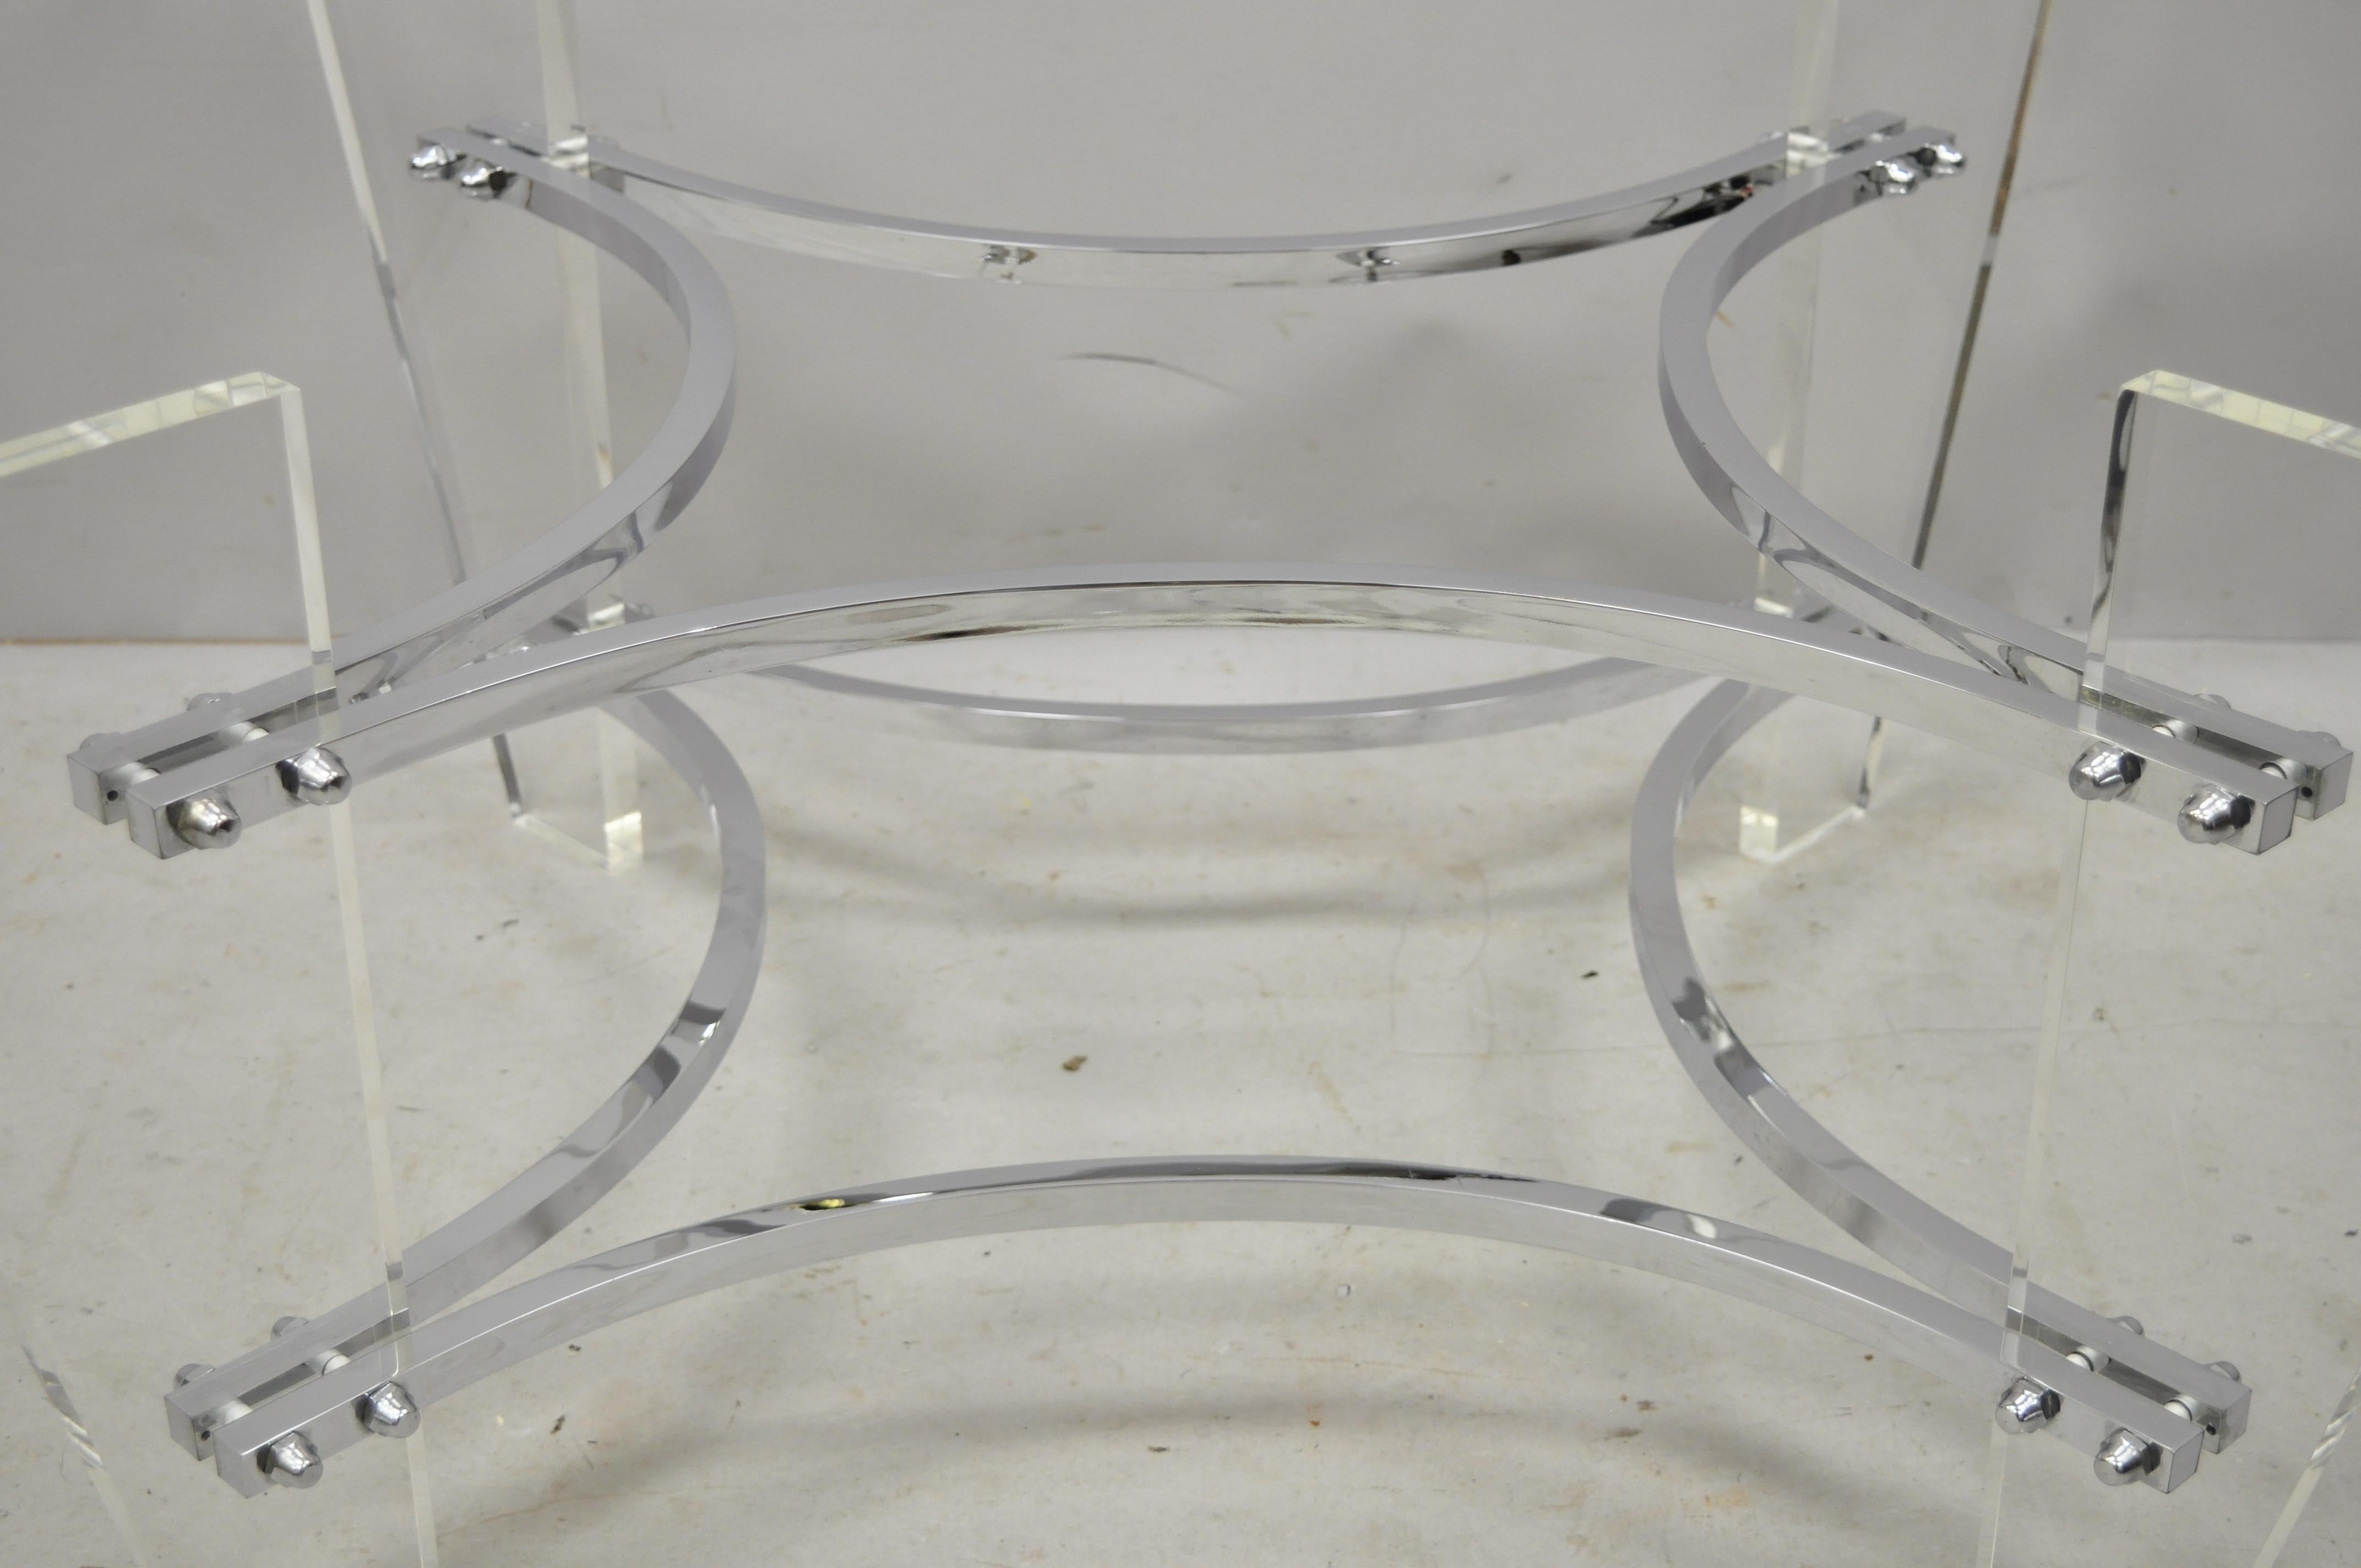 Vintage Charles Hollis Jones Lucite chrome Mid-Century Modern coffee table base. Item features 4 Lucite legs, chrome frame, clean modernist lines, sleek sculptural form. Base only. Does not include glass top, circa mid-late 20th century.